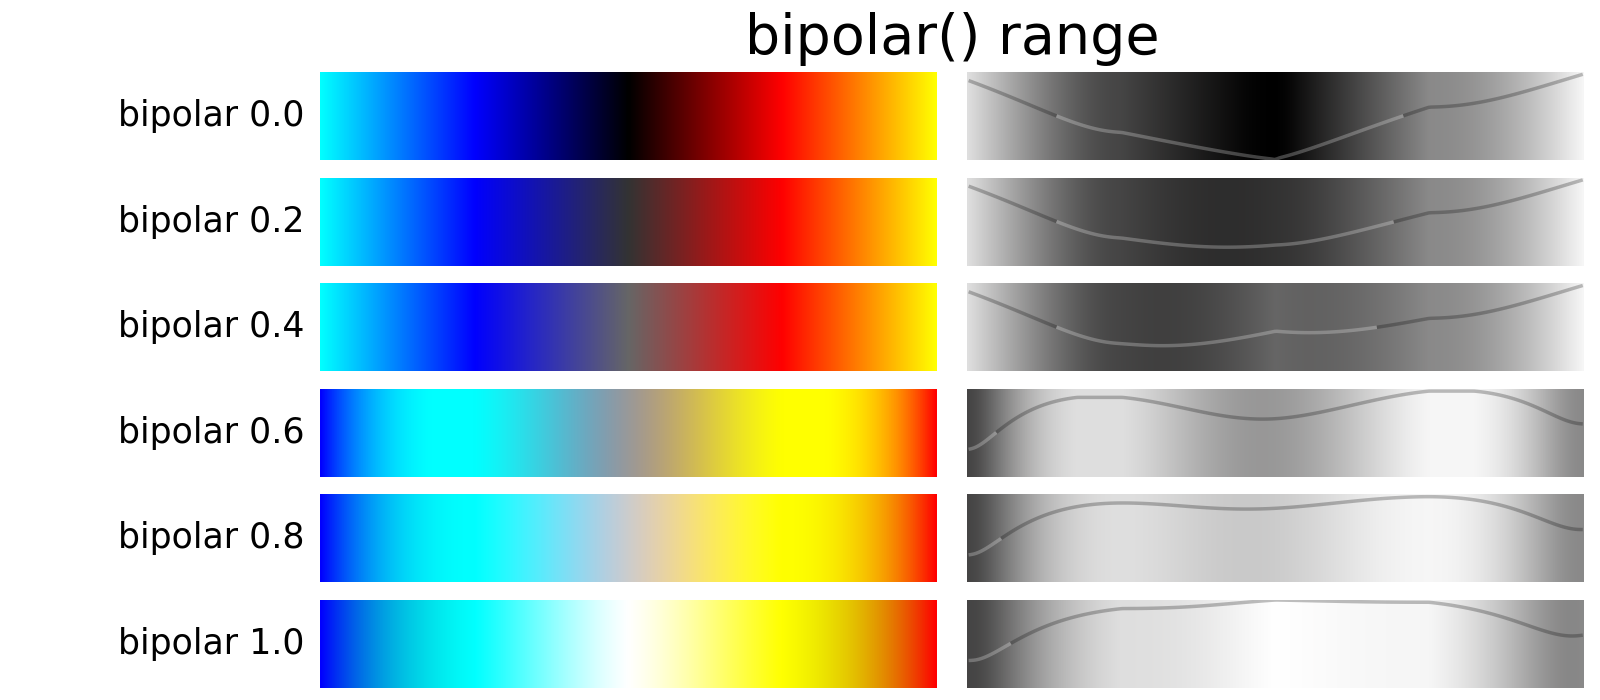 bipolar colormaps of 0.0, 0.2, 0.4, 0.6, 0.8, 1.0 neutral